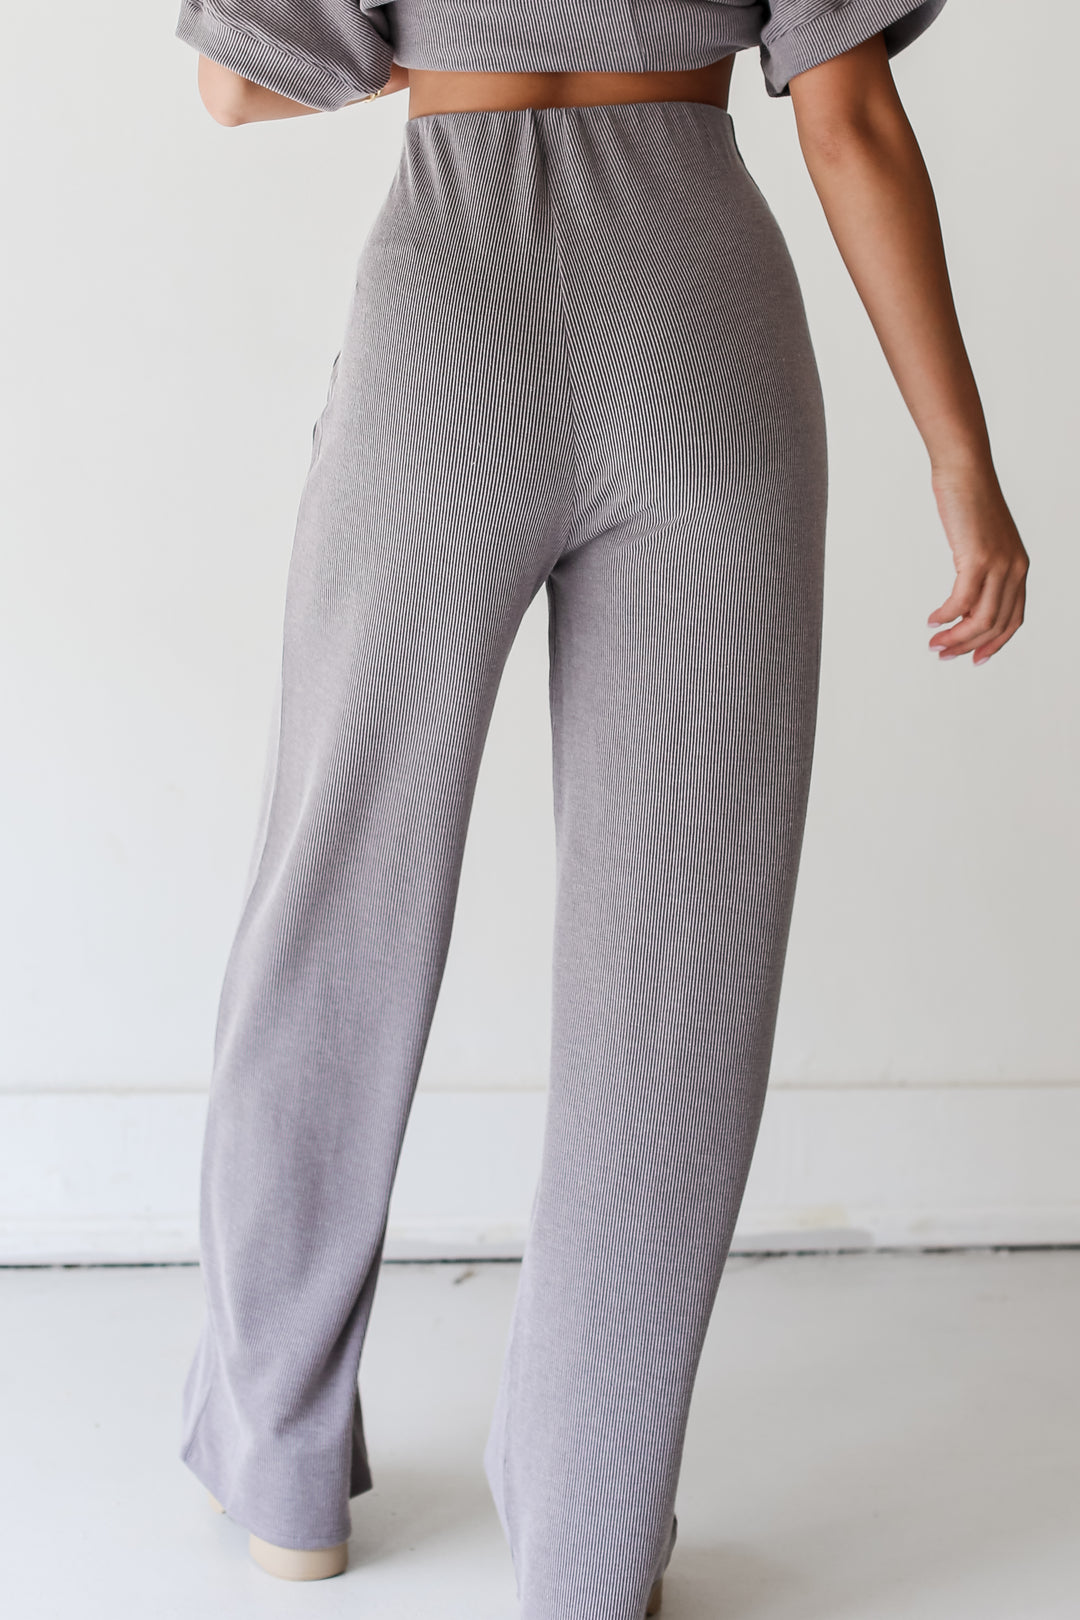 grey Corded Lounge Pants back view